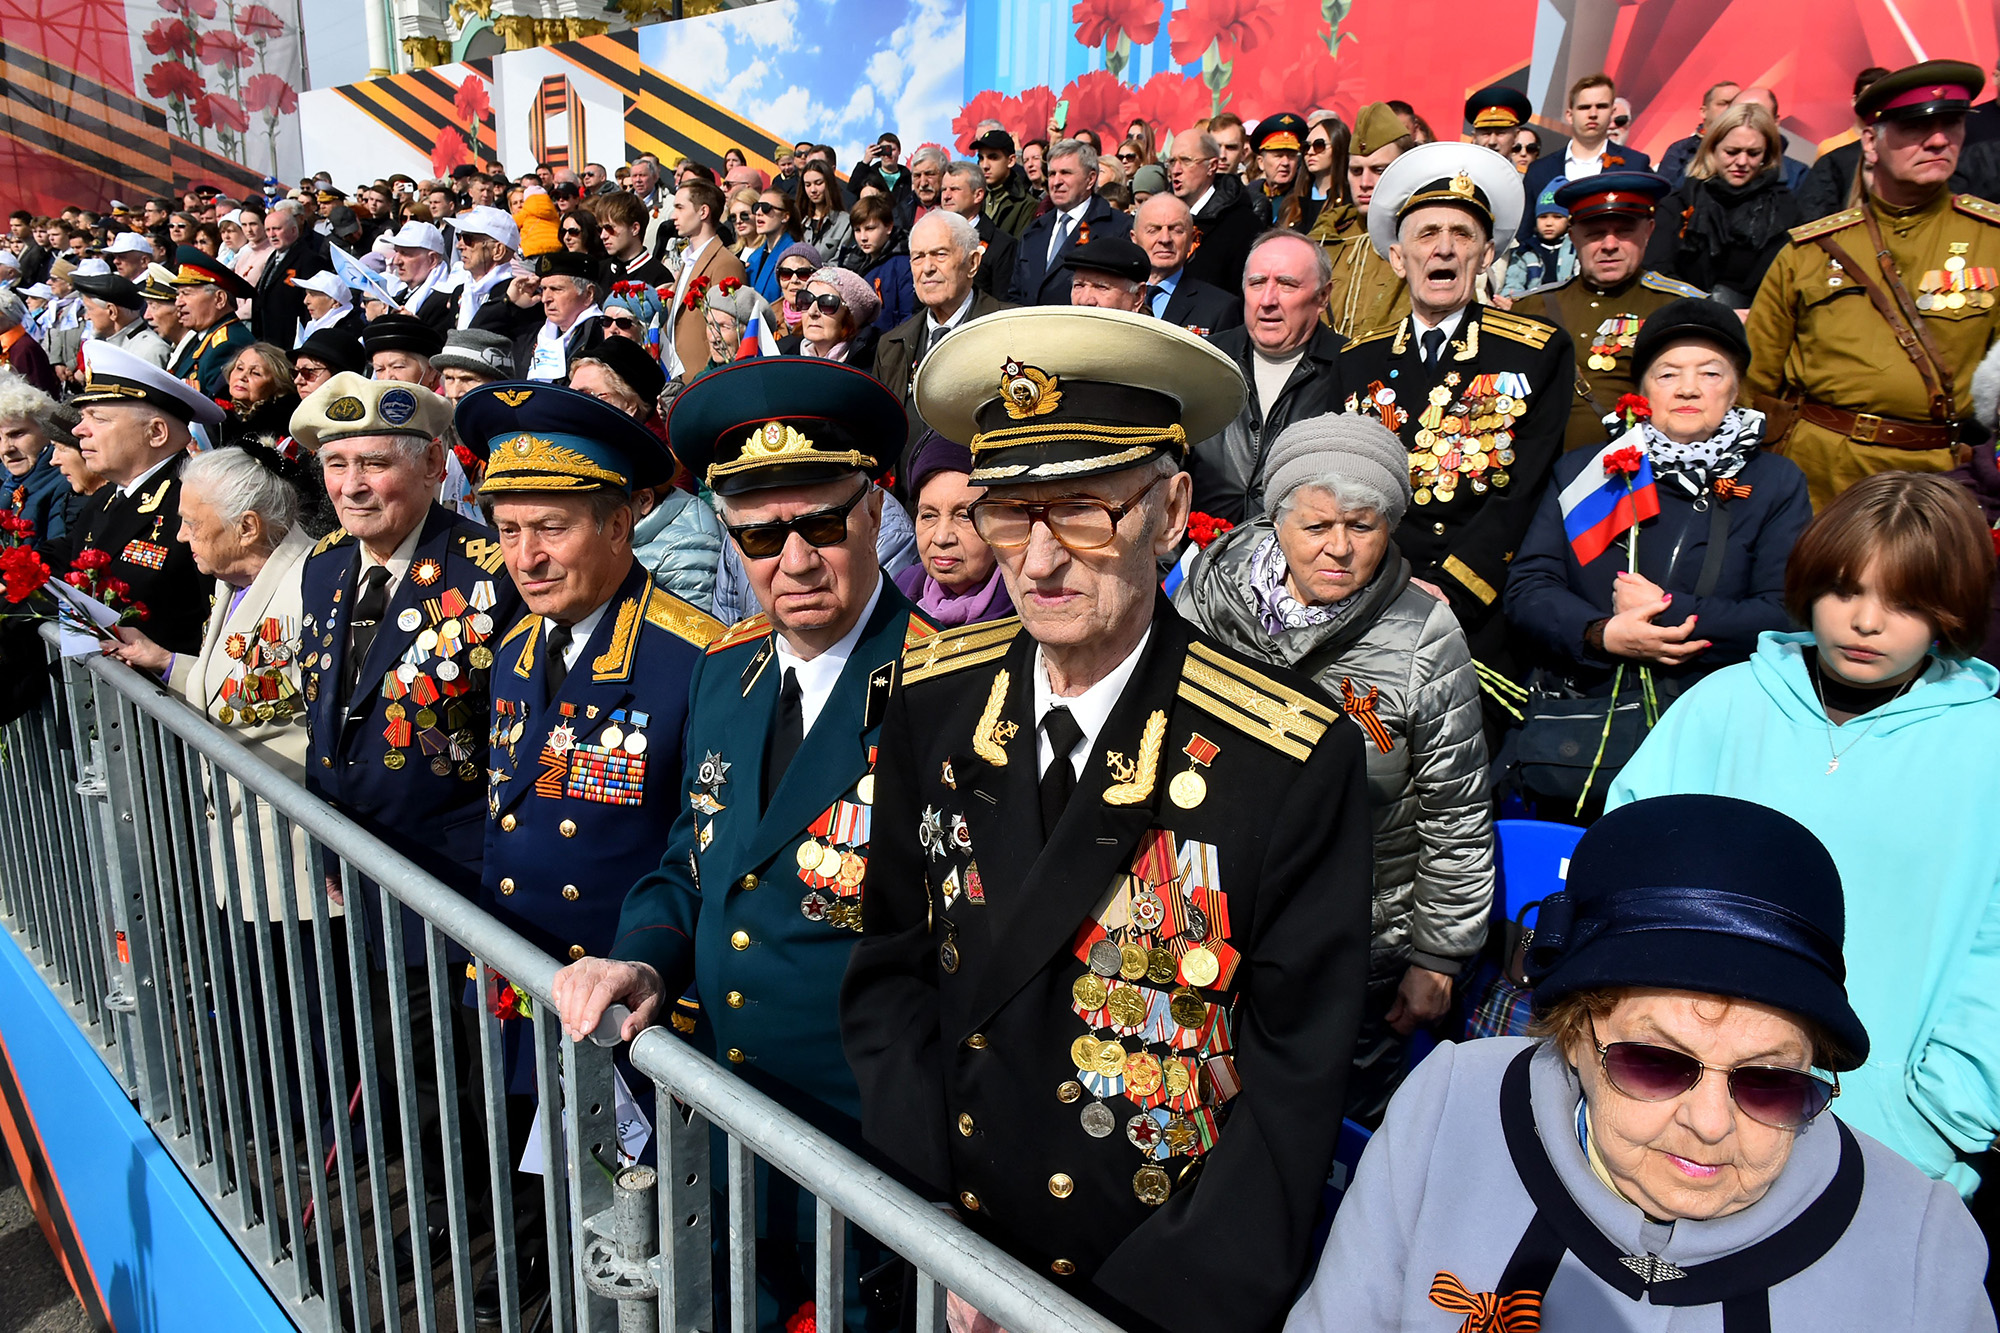 Veterans watch the Victory Day military parade on Dvortsovaya Square in Saint Petersburg, Russia, on May 9.